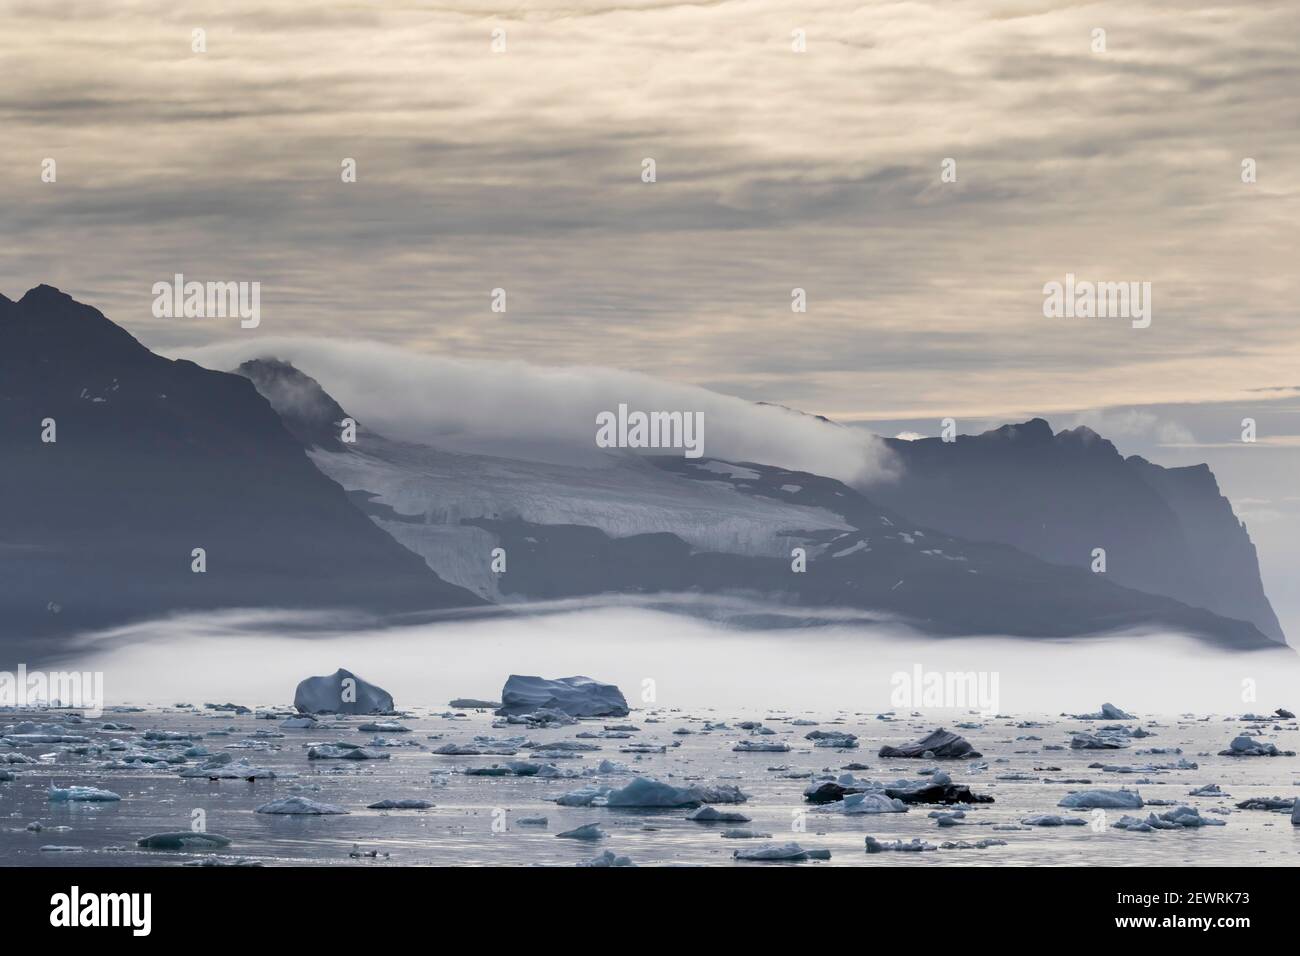 Sea ice and icebergs calved from the Christian IV Glacier, Nansen Fjord, eastern Greenland, Polar Regions Stock Photo